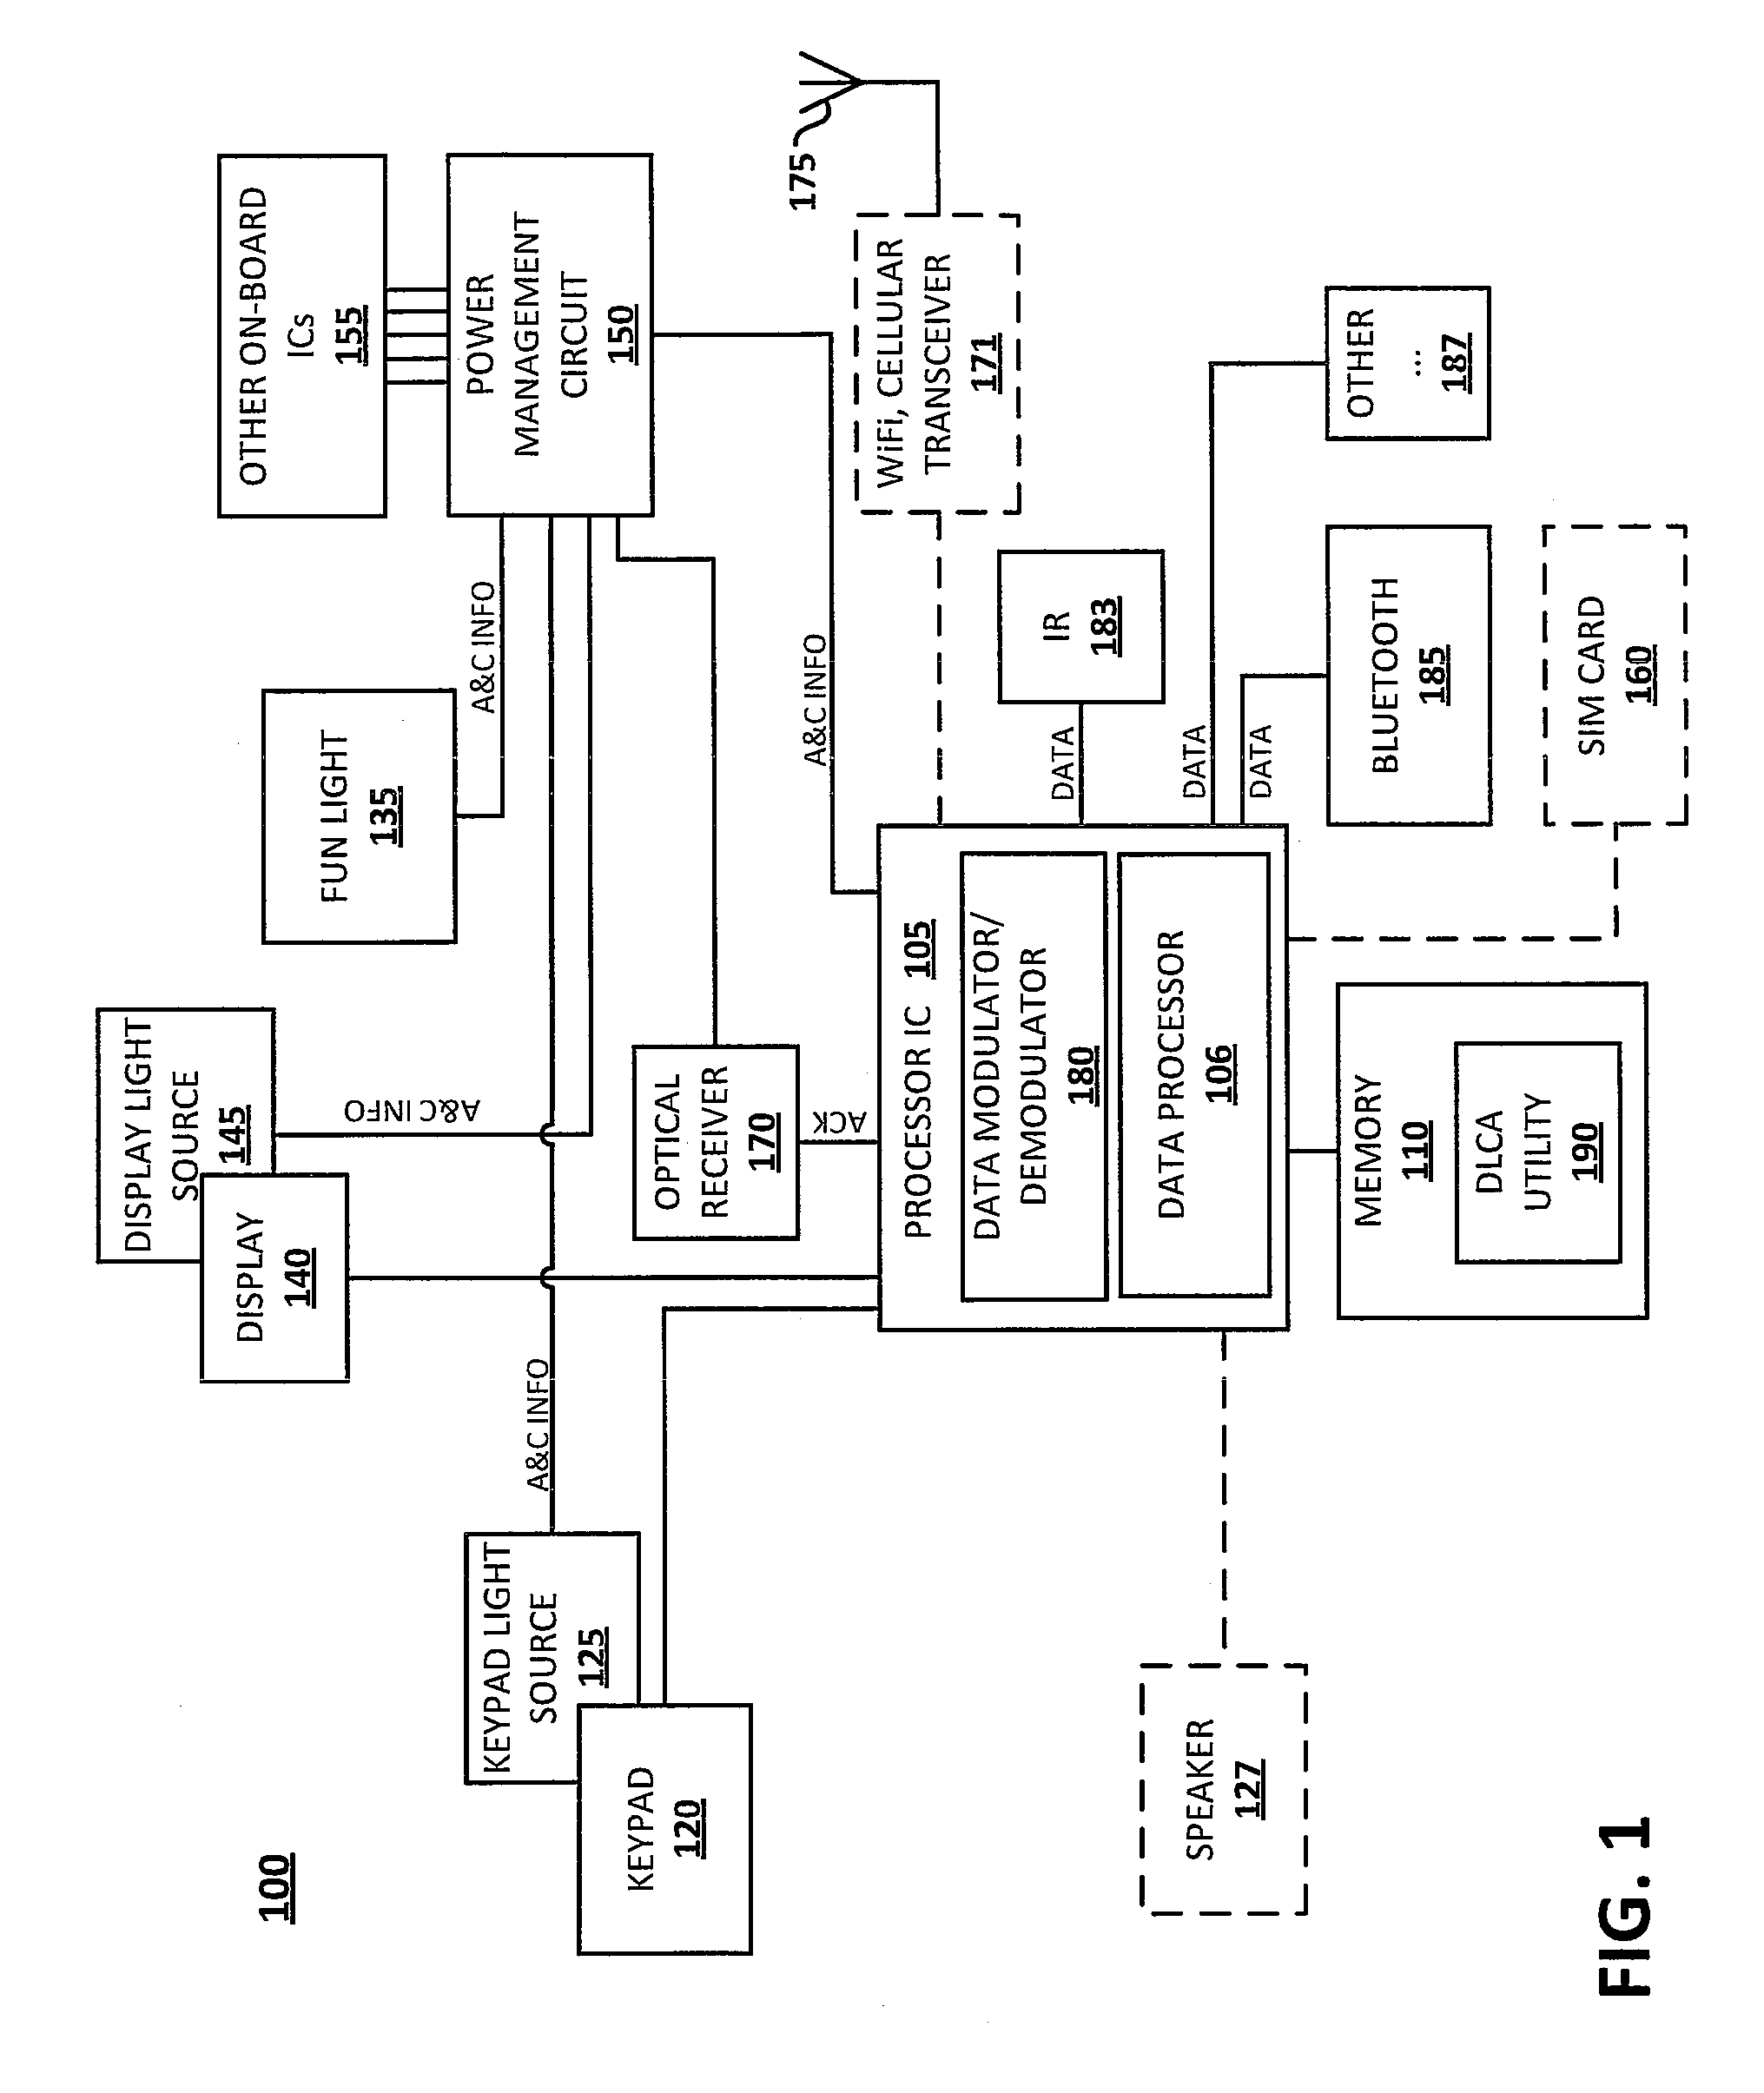 System and Method for Pre-Configuring and Authenticating Data Communication Links